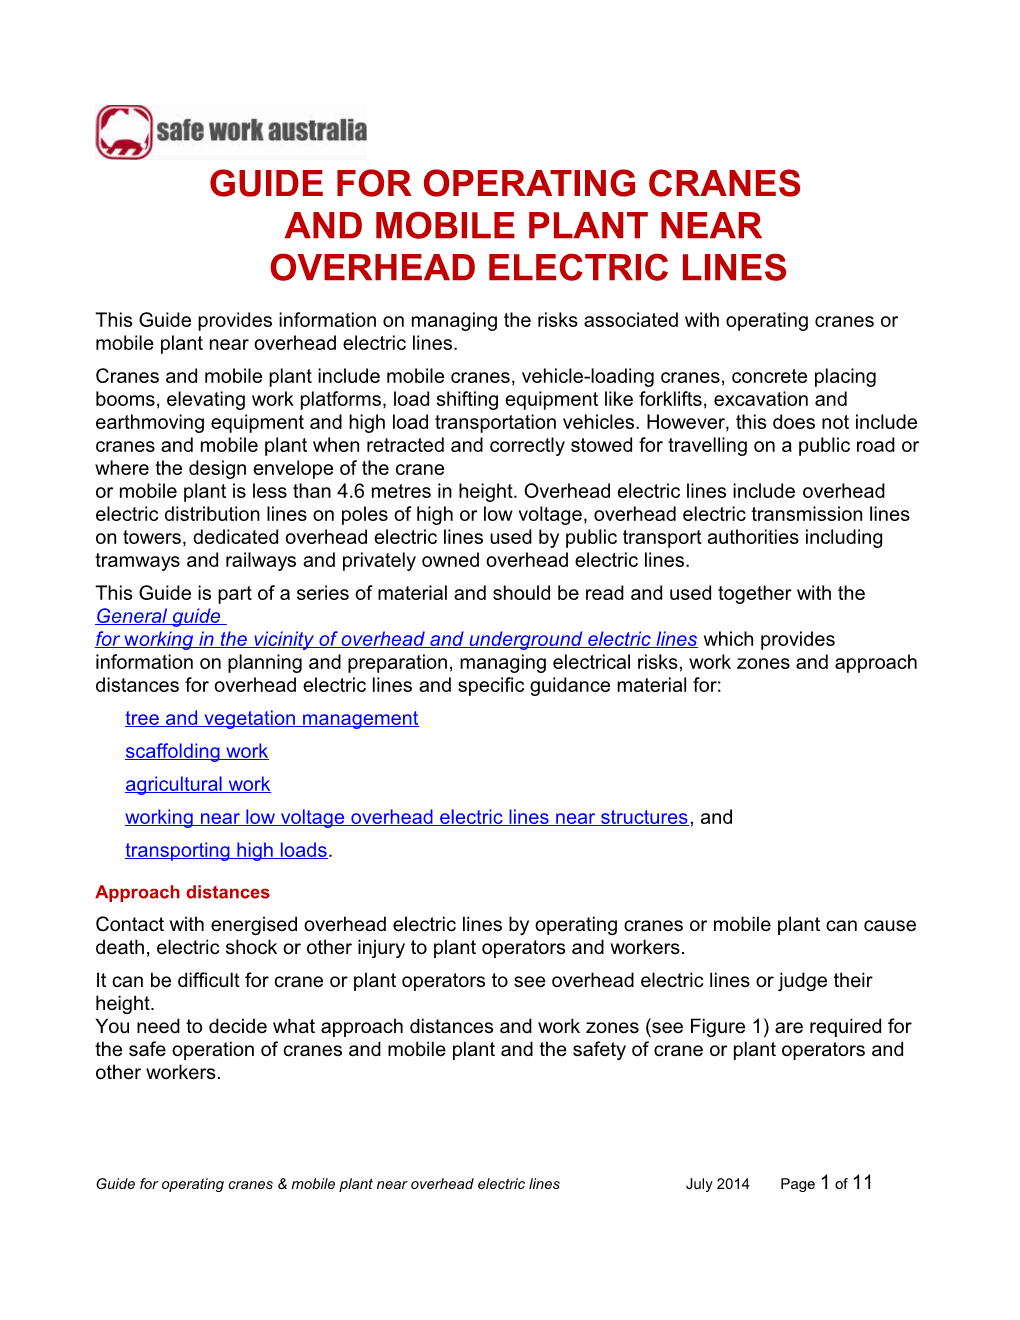 07. Guide for Operating Cranes and Mobile Plant Near Overhead Electric Lines